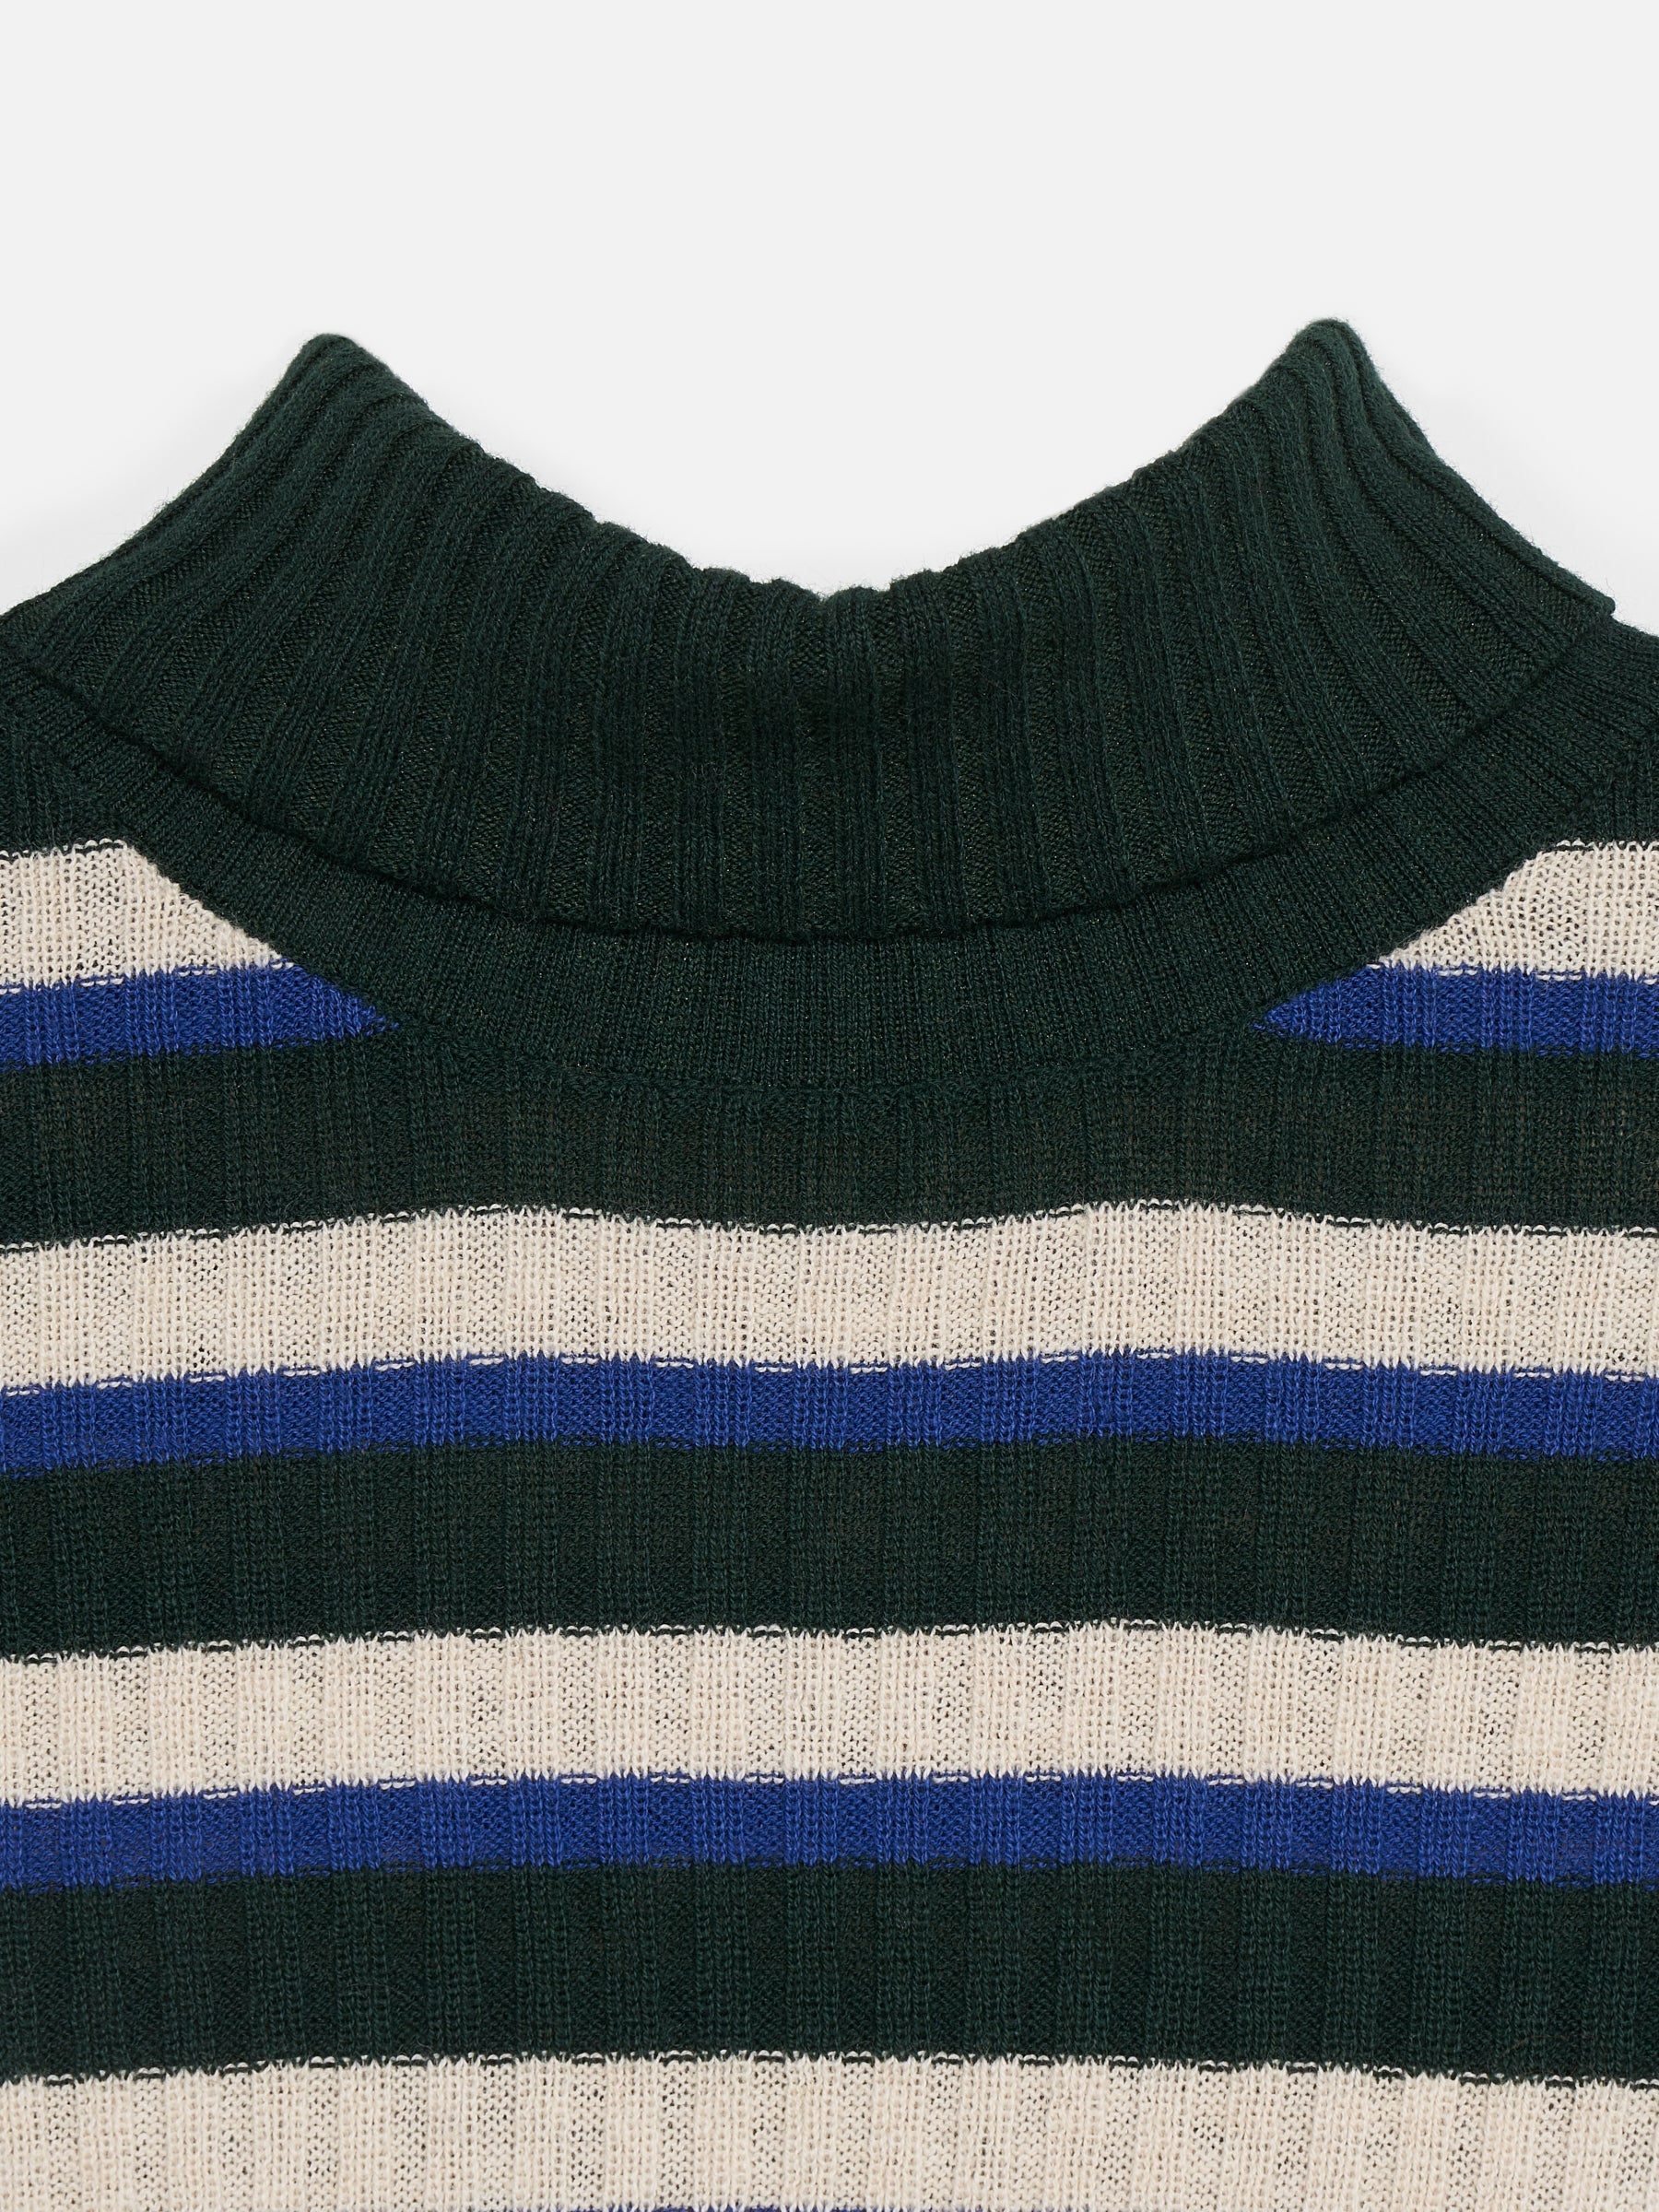 Bellerose - Gouly Knit Sweater